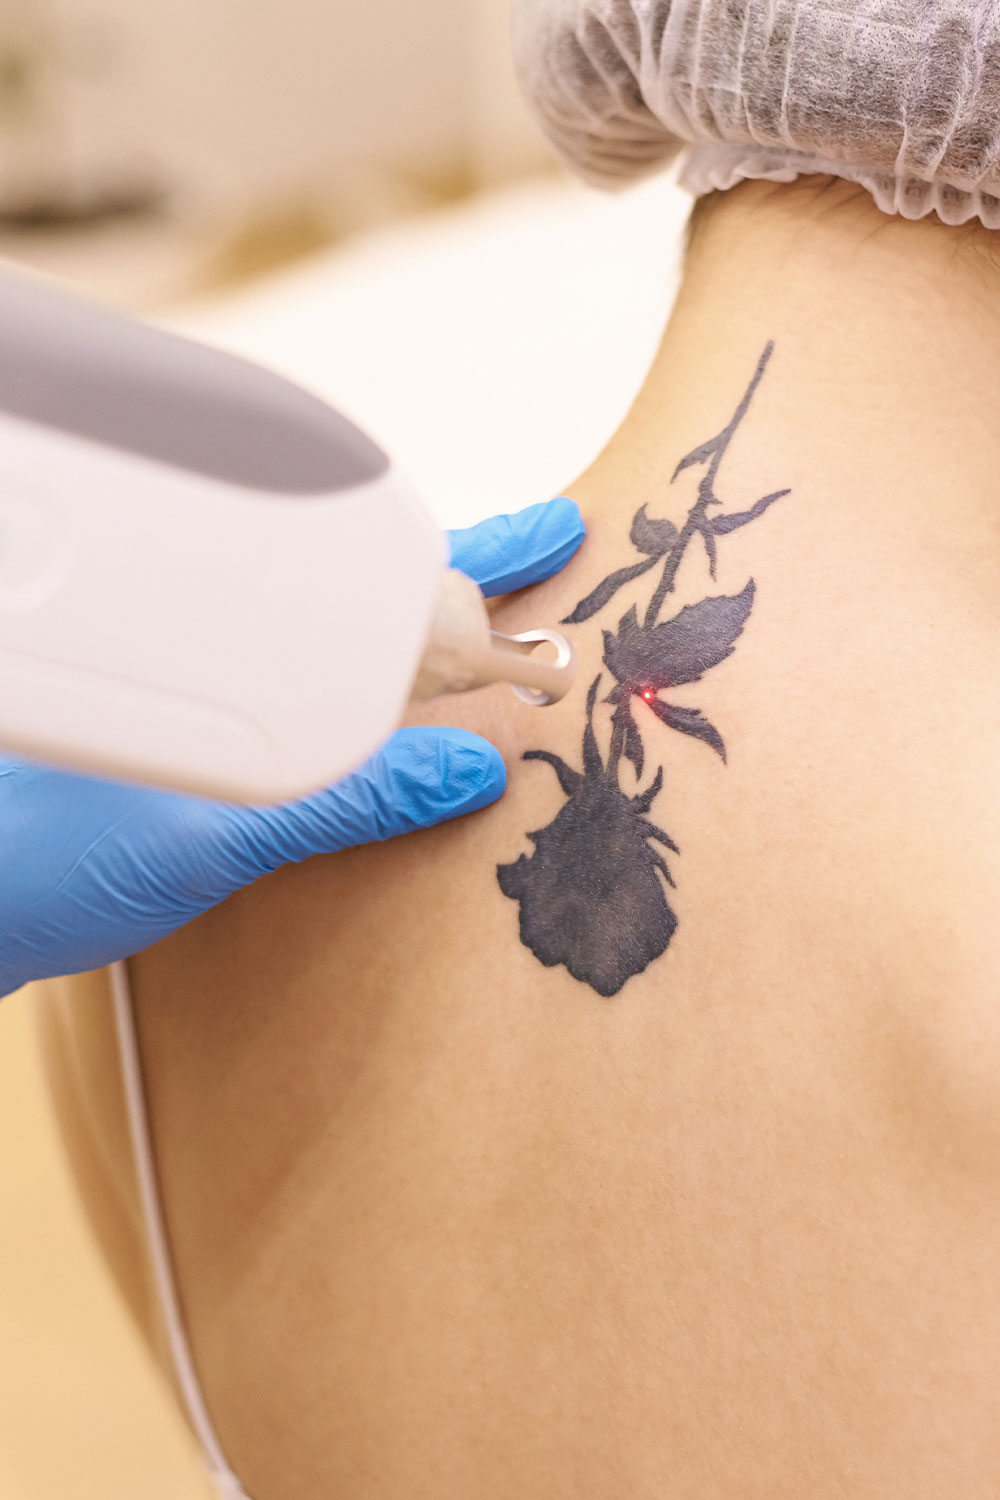 Derma Klinic - Want to Remove your Tattoo Permanently? Get the Laser Tattoo  Reduction Treatment for any kind of Tattoo, need to remove. You can book a  free ONLINE VIDEO CONSULTATION for